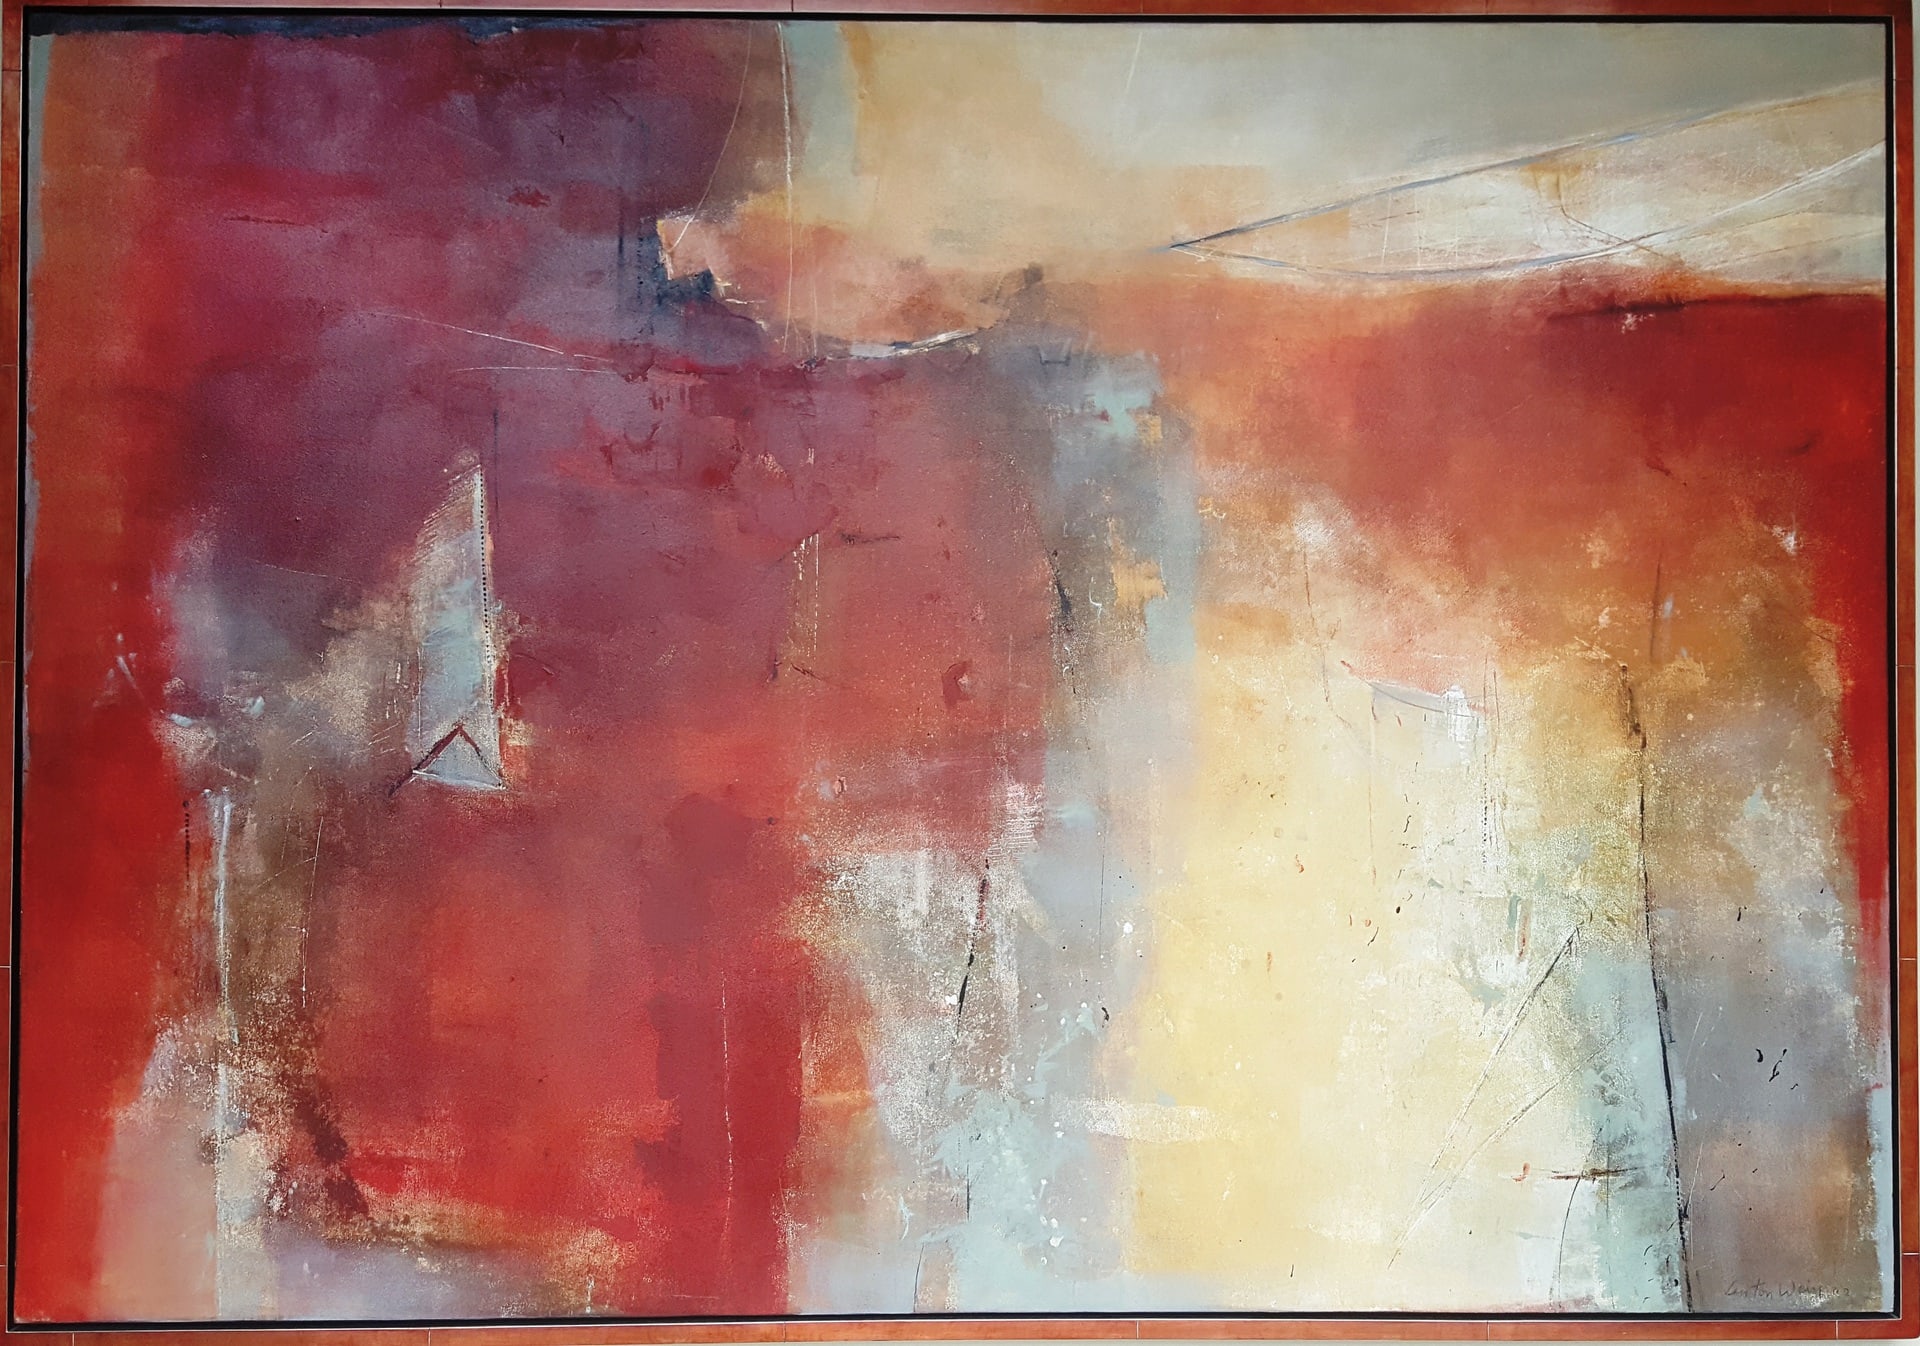 Anton Weiss. Abstract. A painting without subjects, other than pure color, shape, and texture Rust red, grey and off-white predominate, with the rust red characterizing the painting more than the rest.